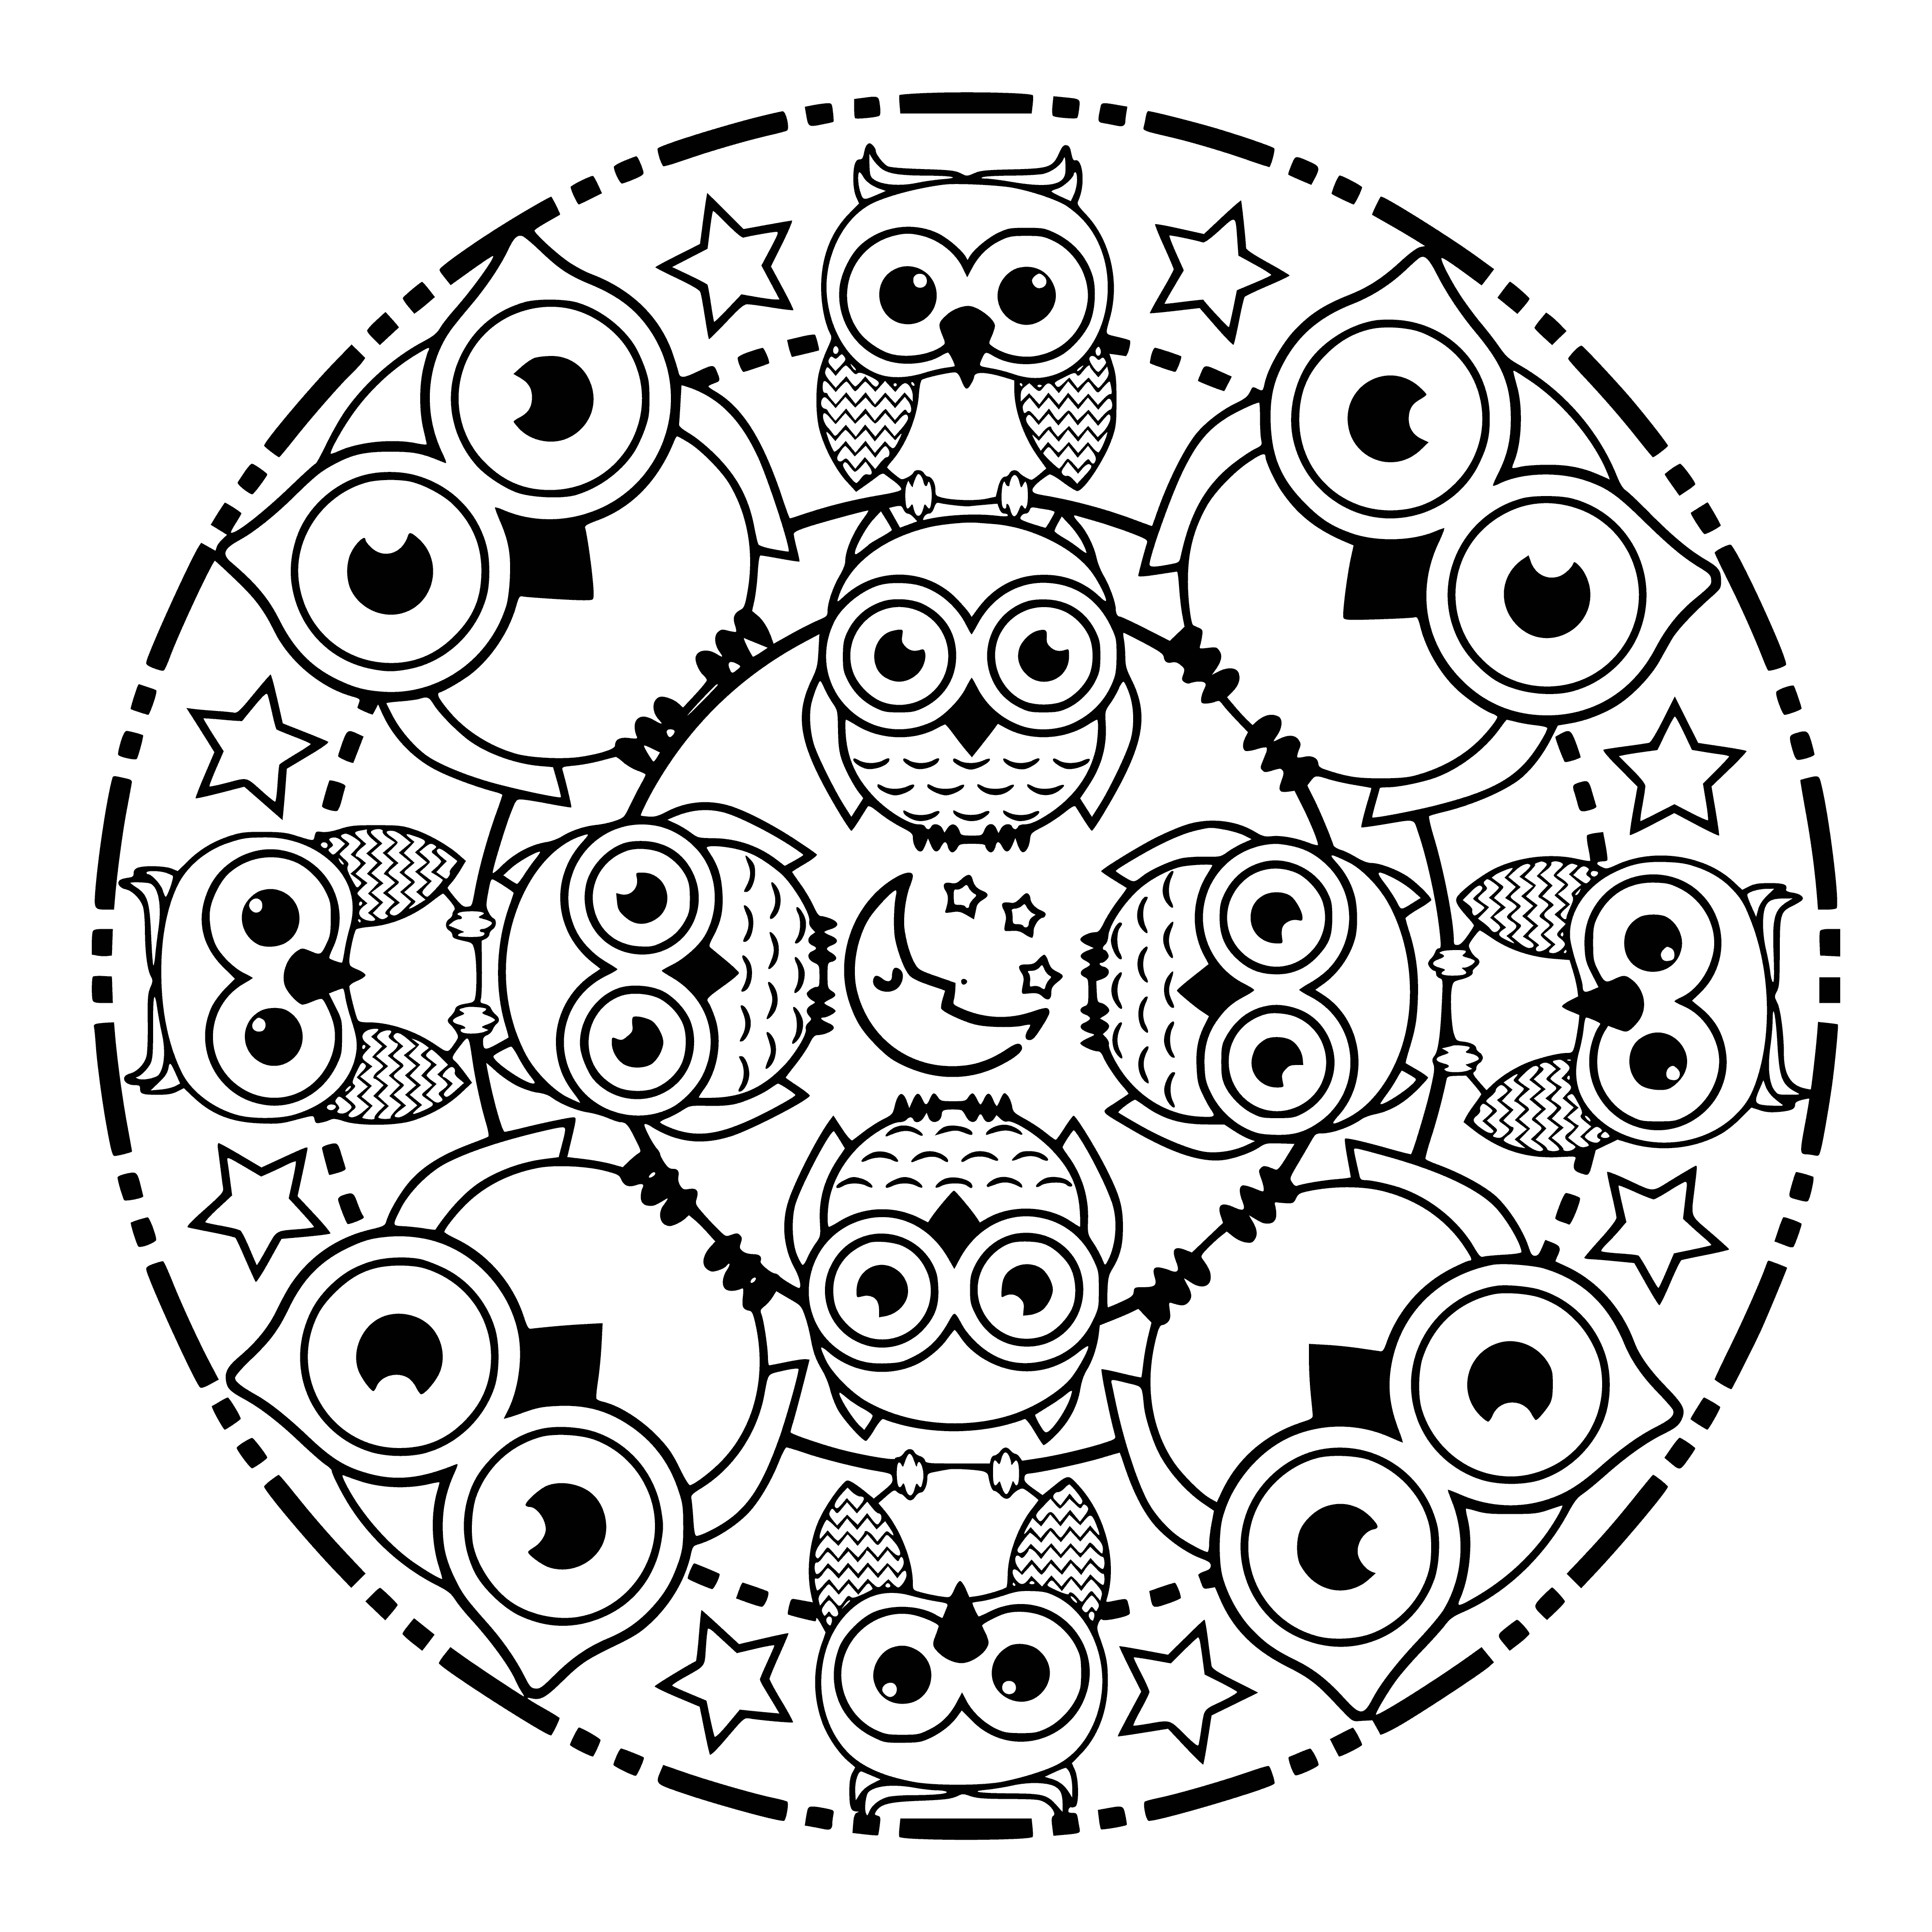 coloring page: Detailed black & white mandala coloring page w/ two large-eyed owls perched atop intricate patterns & swirls.